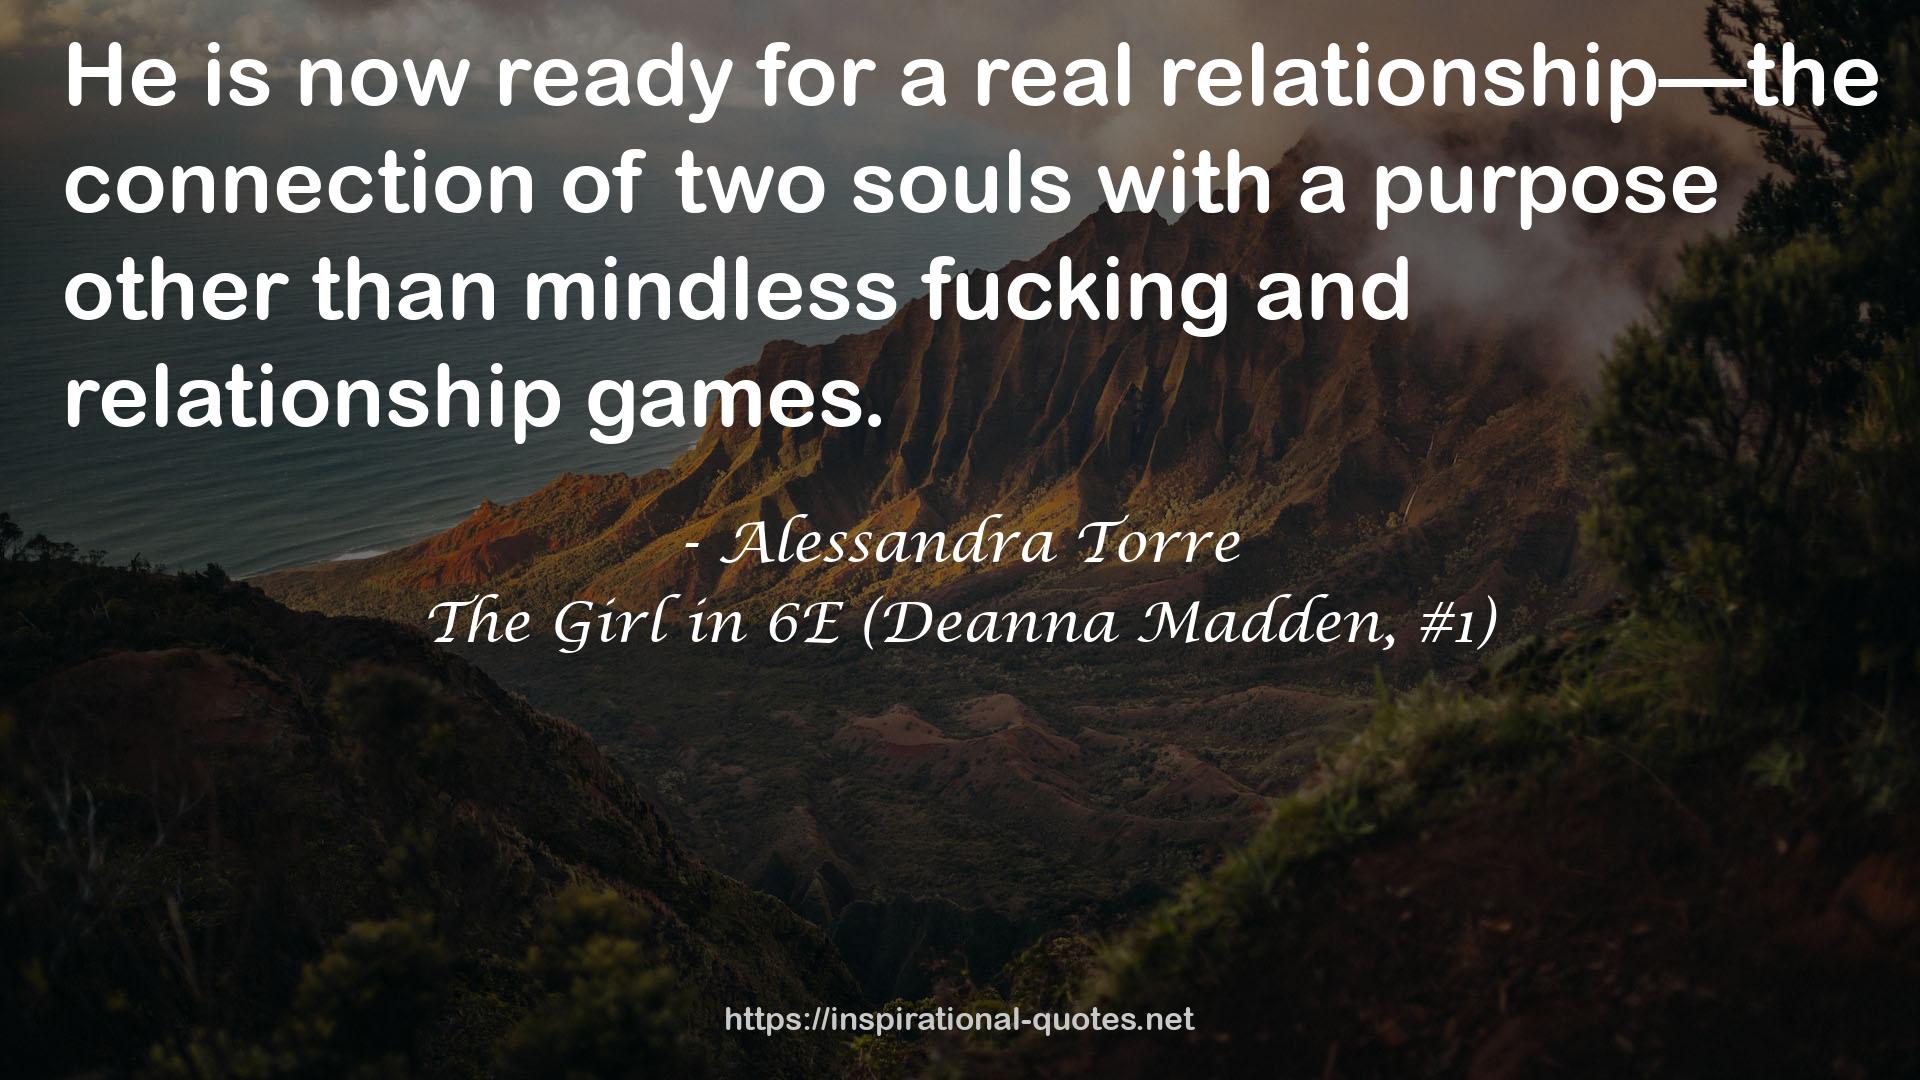 The Girl in 6E (Deanna Madden, #1) QUOTES